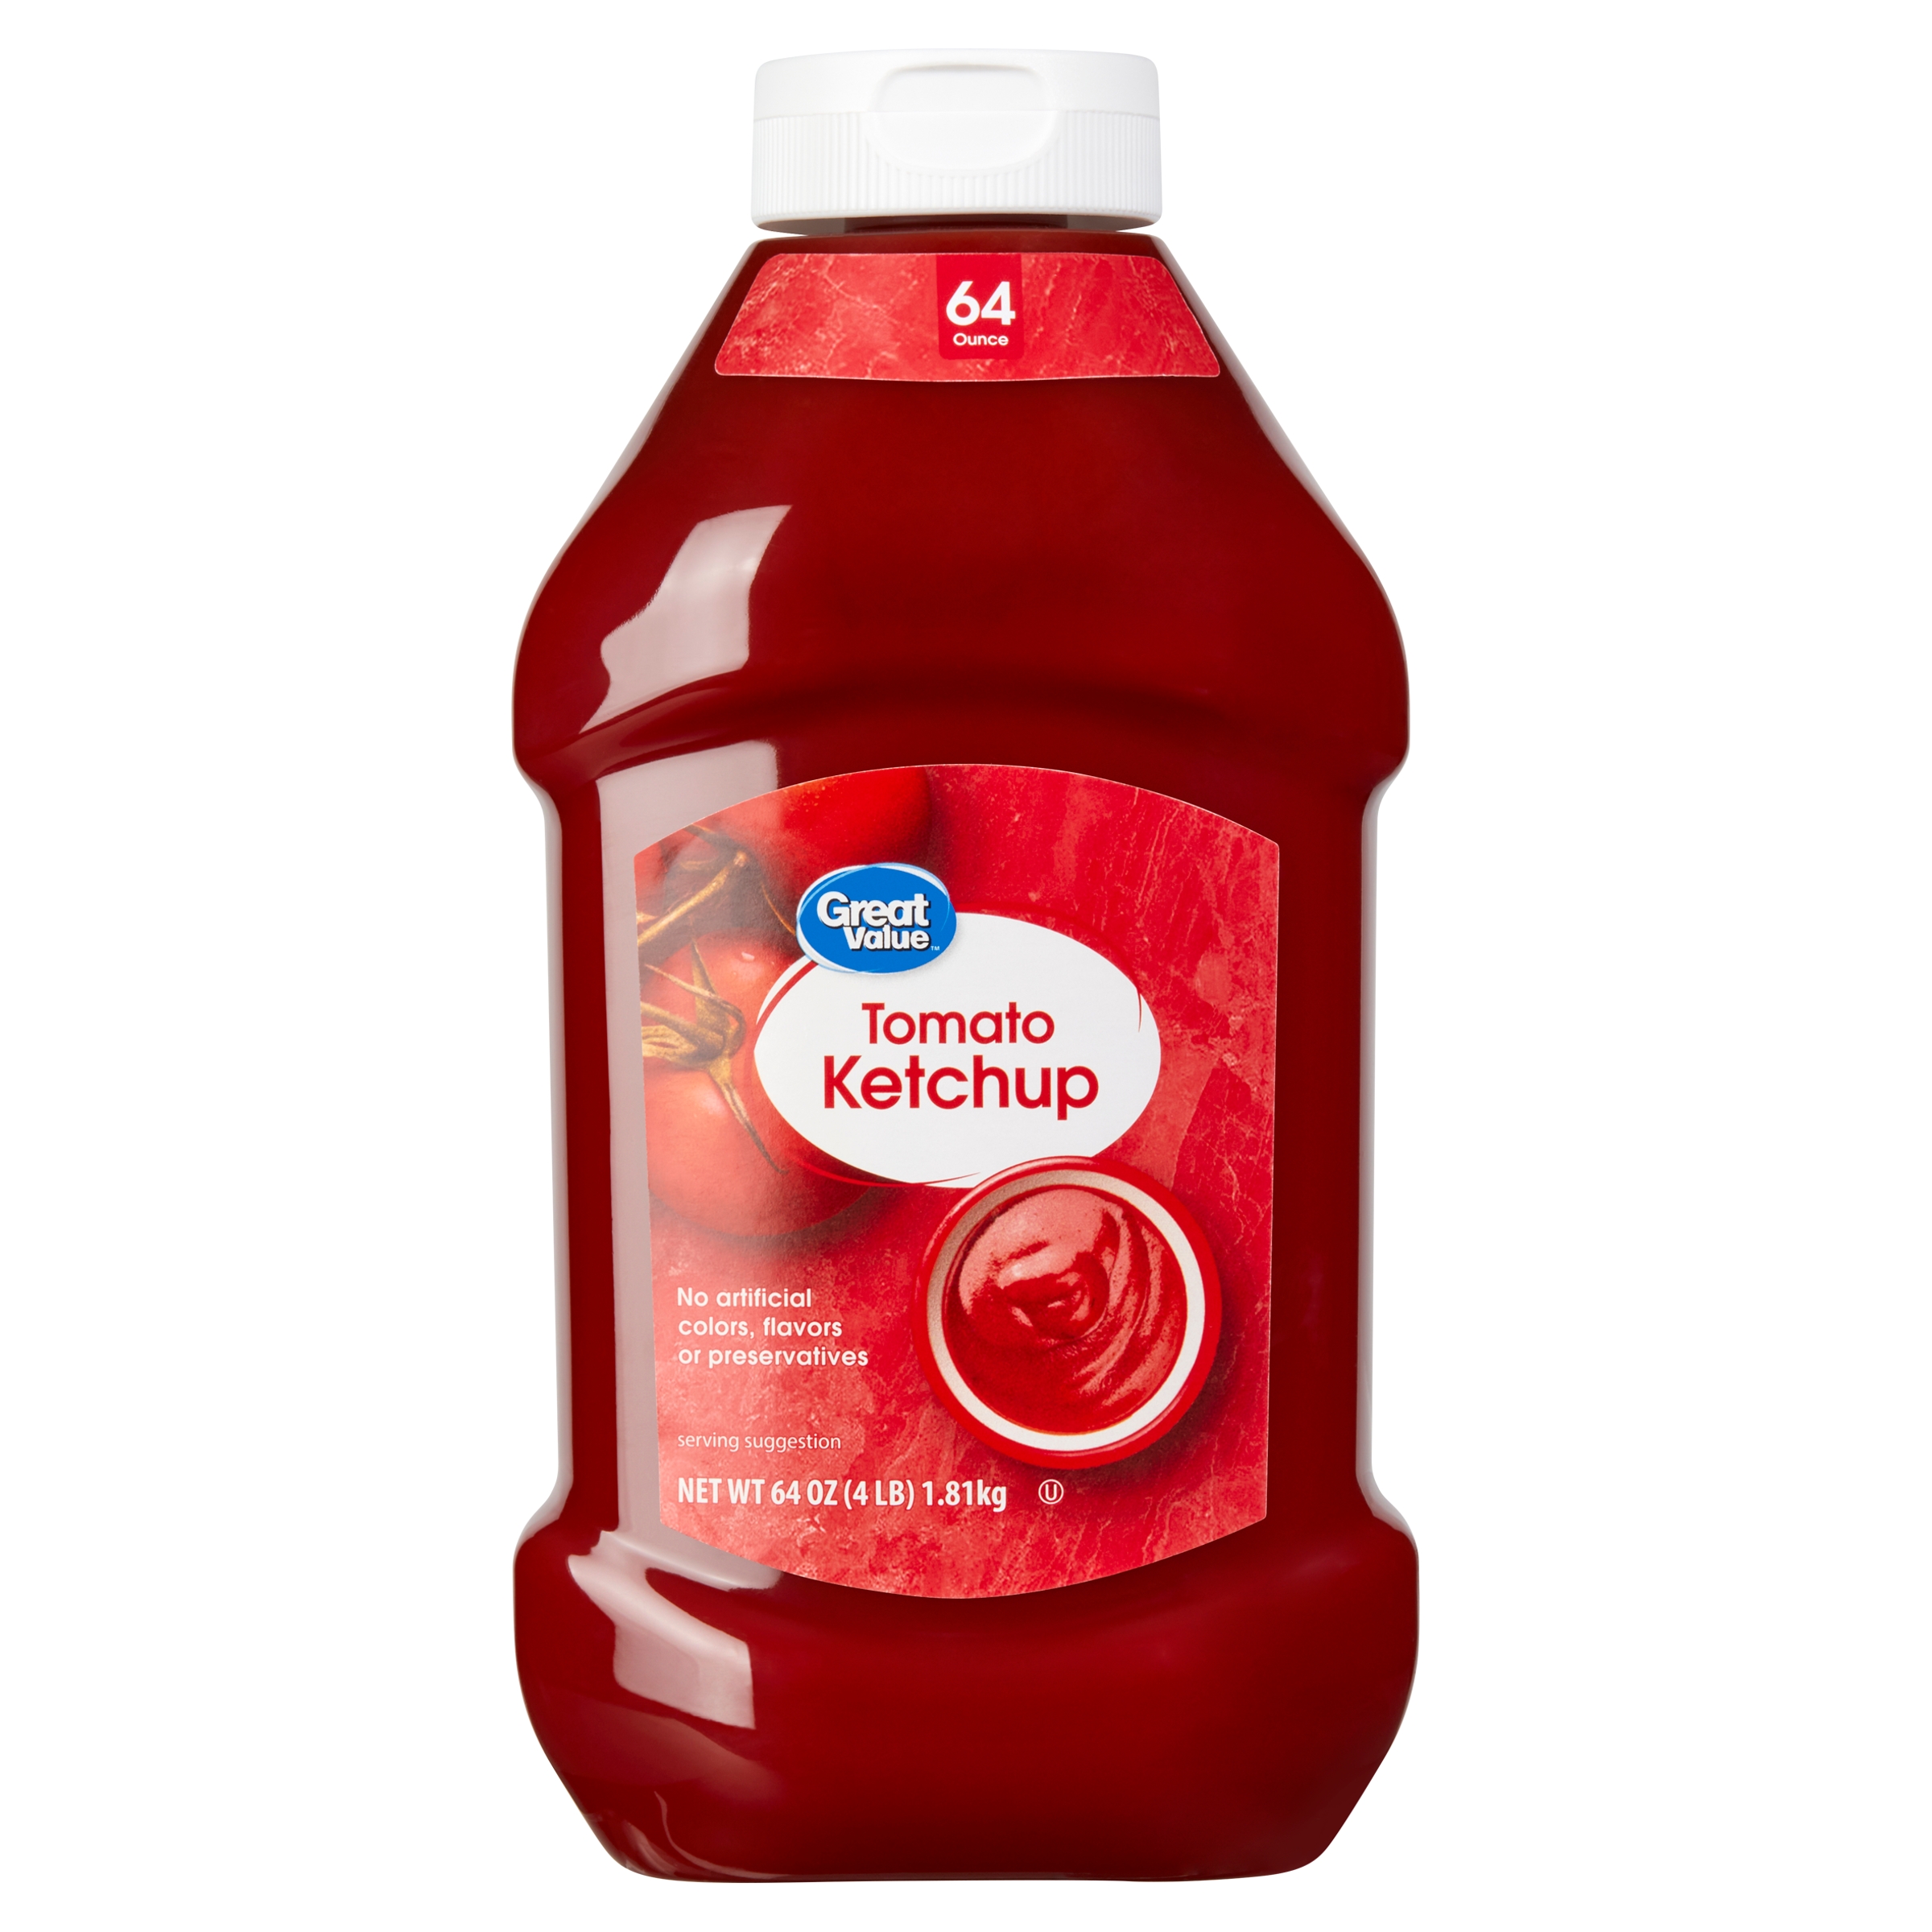 Great Value Tomato Ketchup, 64 oz - image 1 of 7